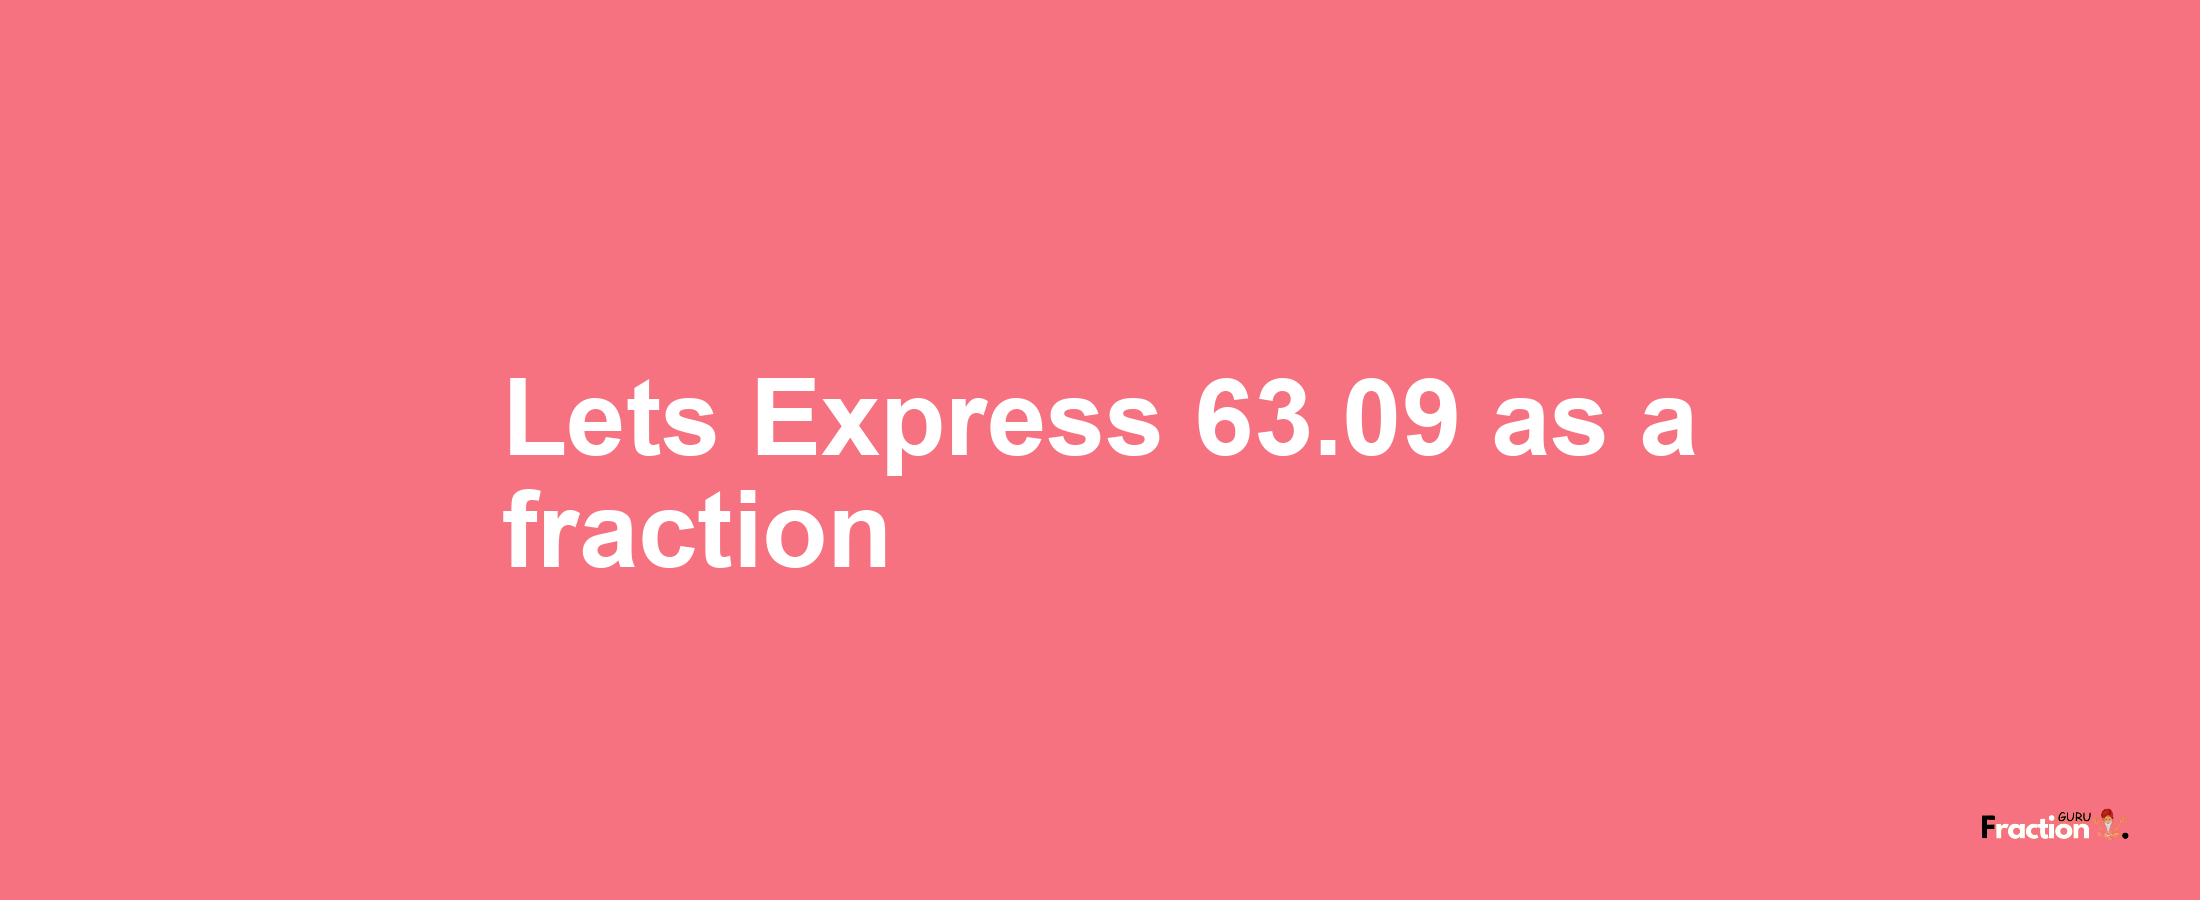 Lets Express 63.09 as afraction